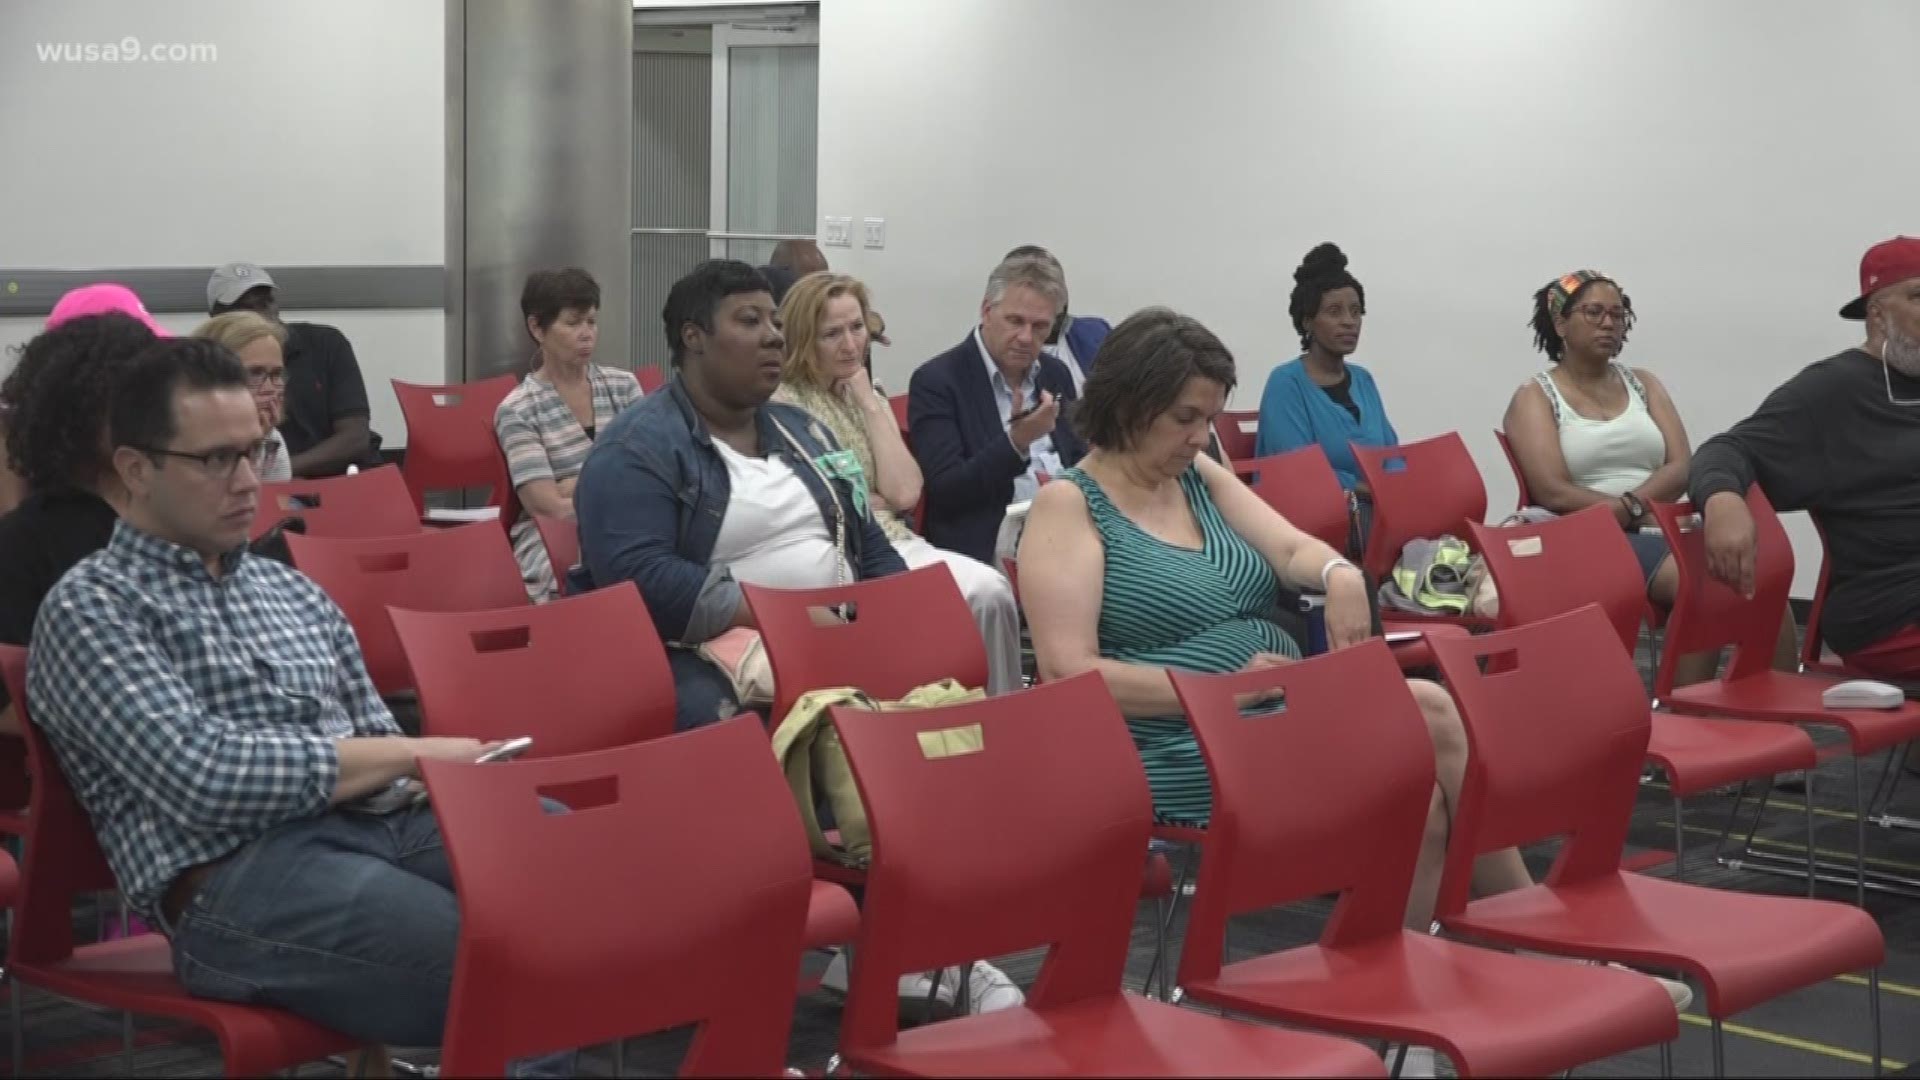 At the last community hearing to discuss Edmond's re-sentencing, members of the public debated whether the drug kingpin should be released from prison early.